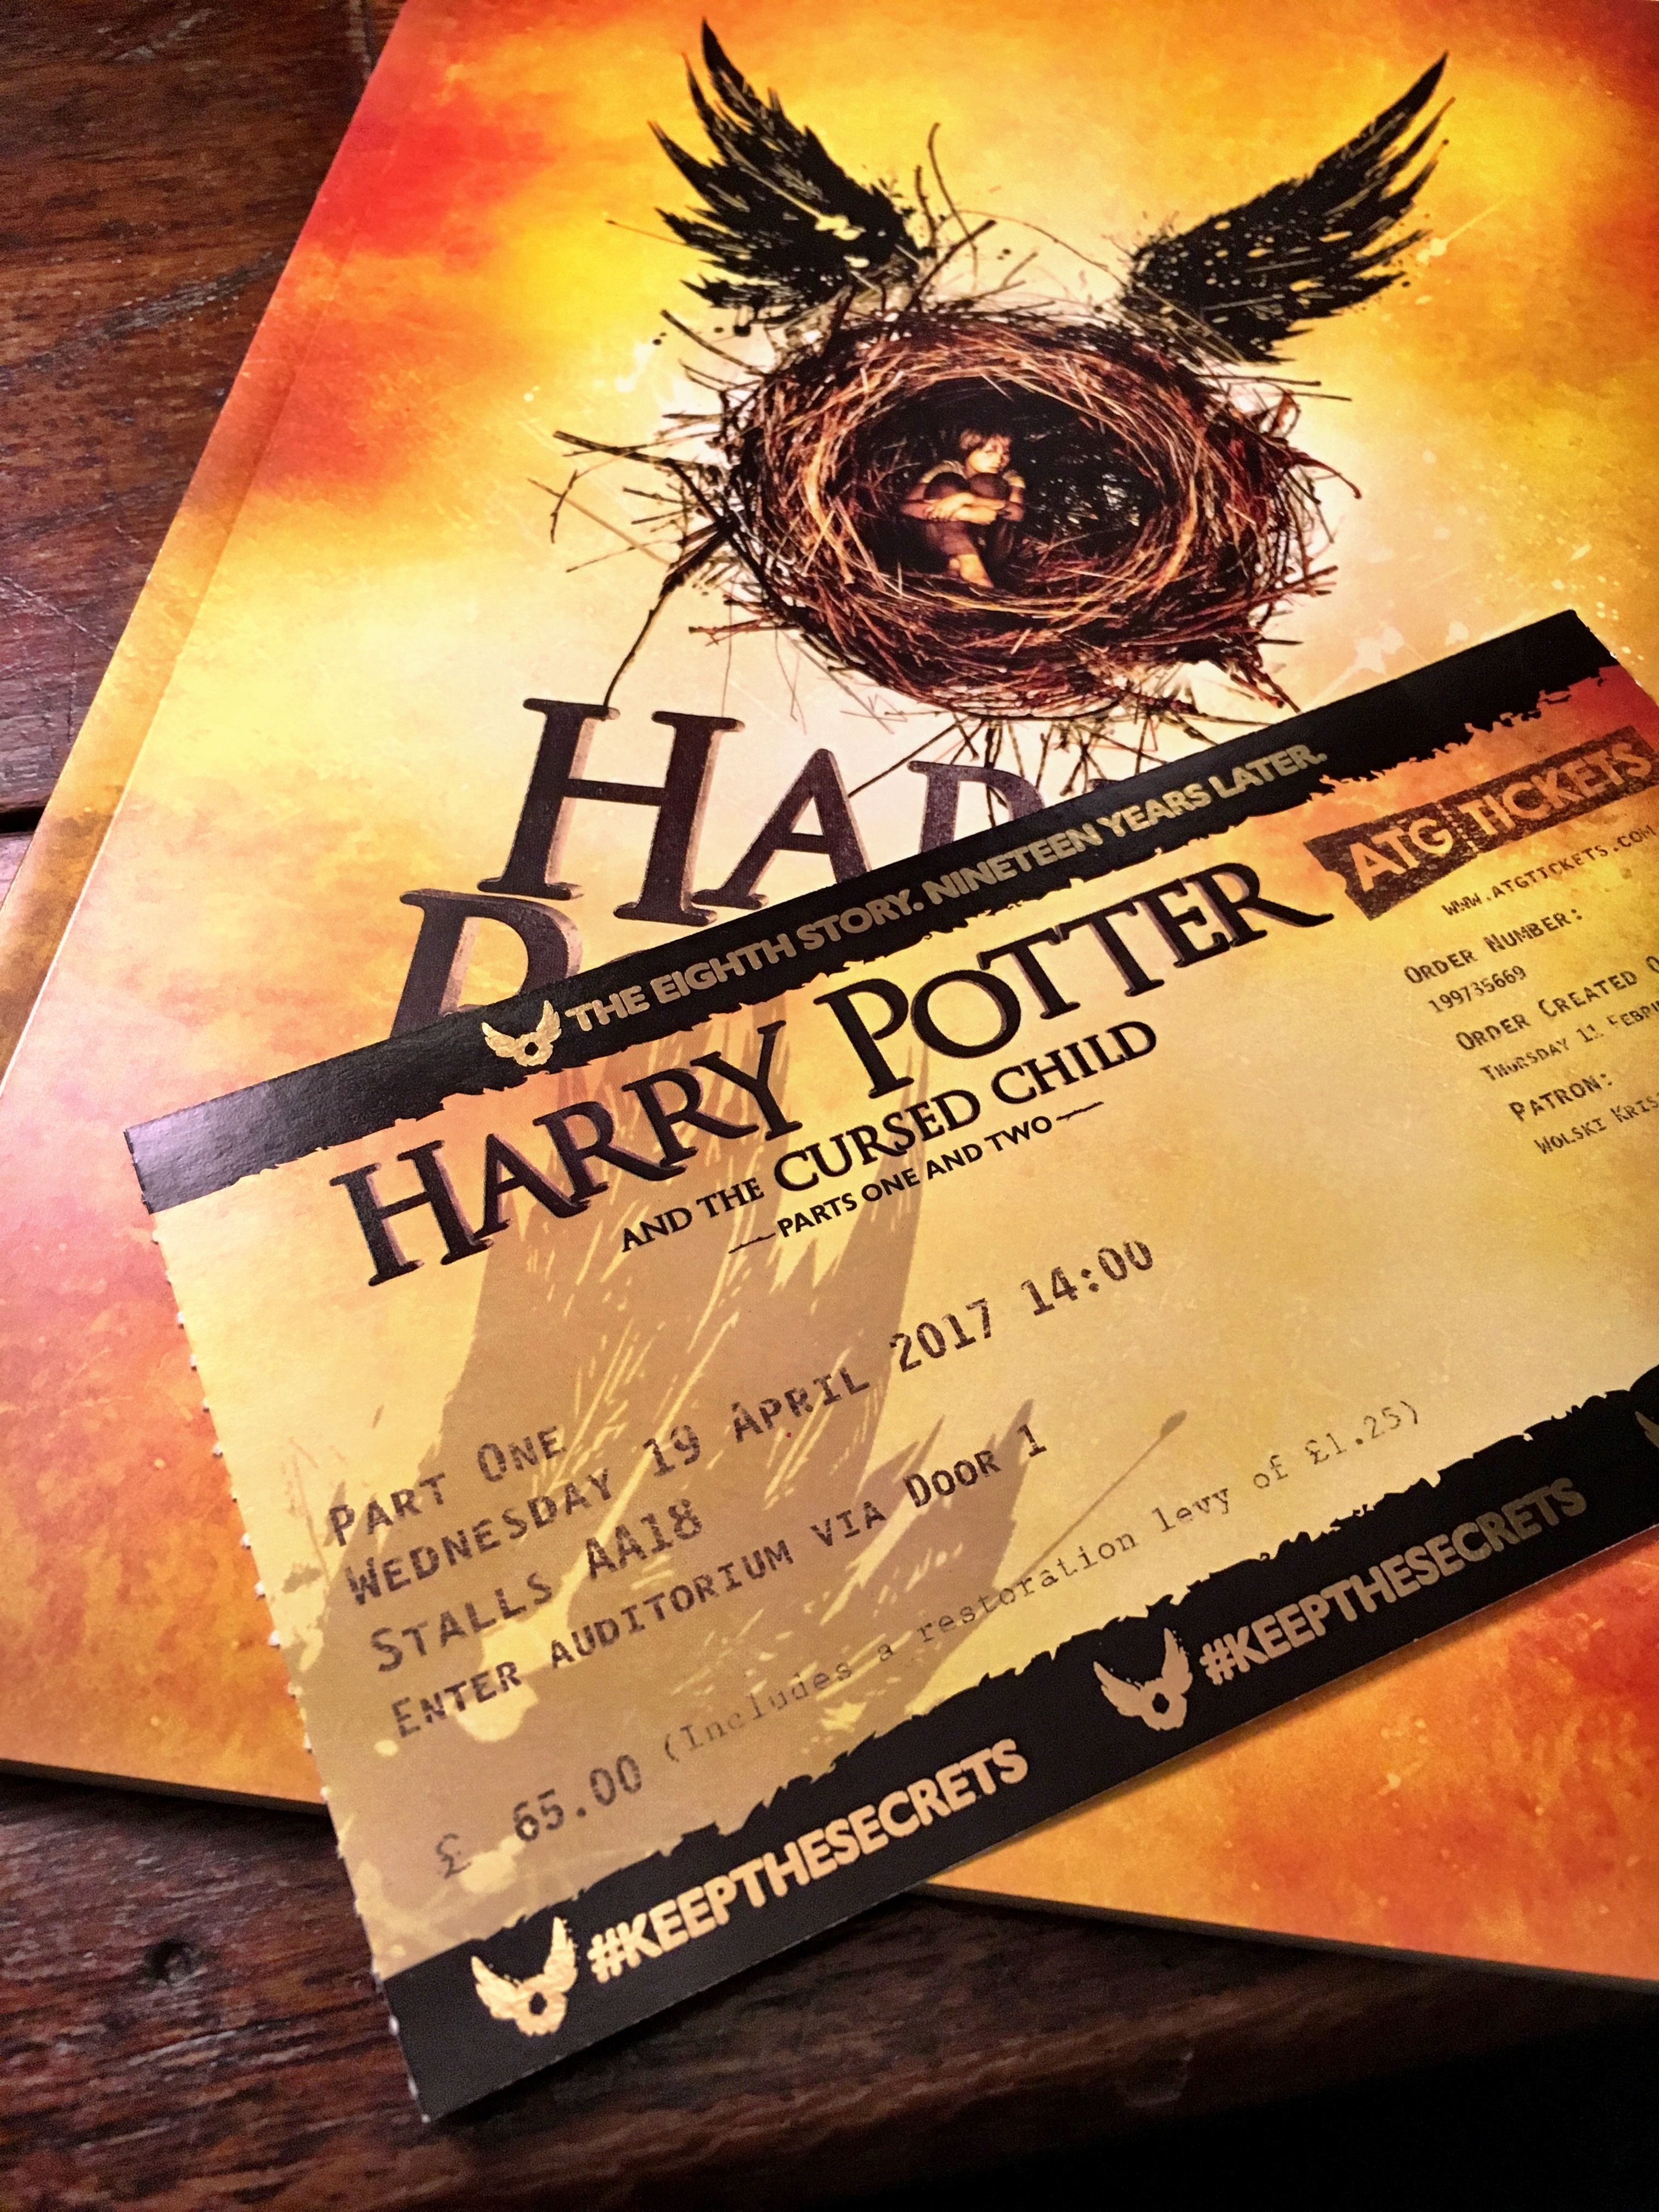 Harry Potter and the Cursed Child on the West End, London